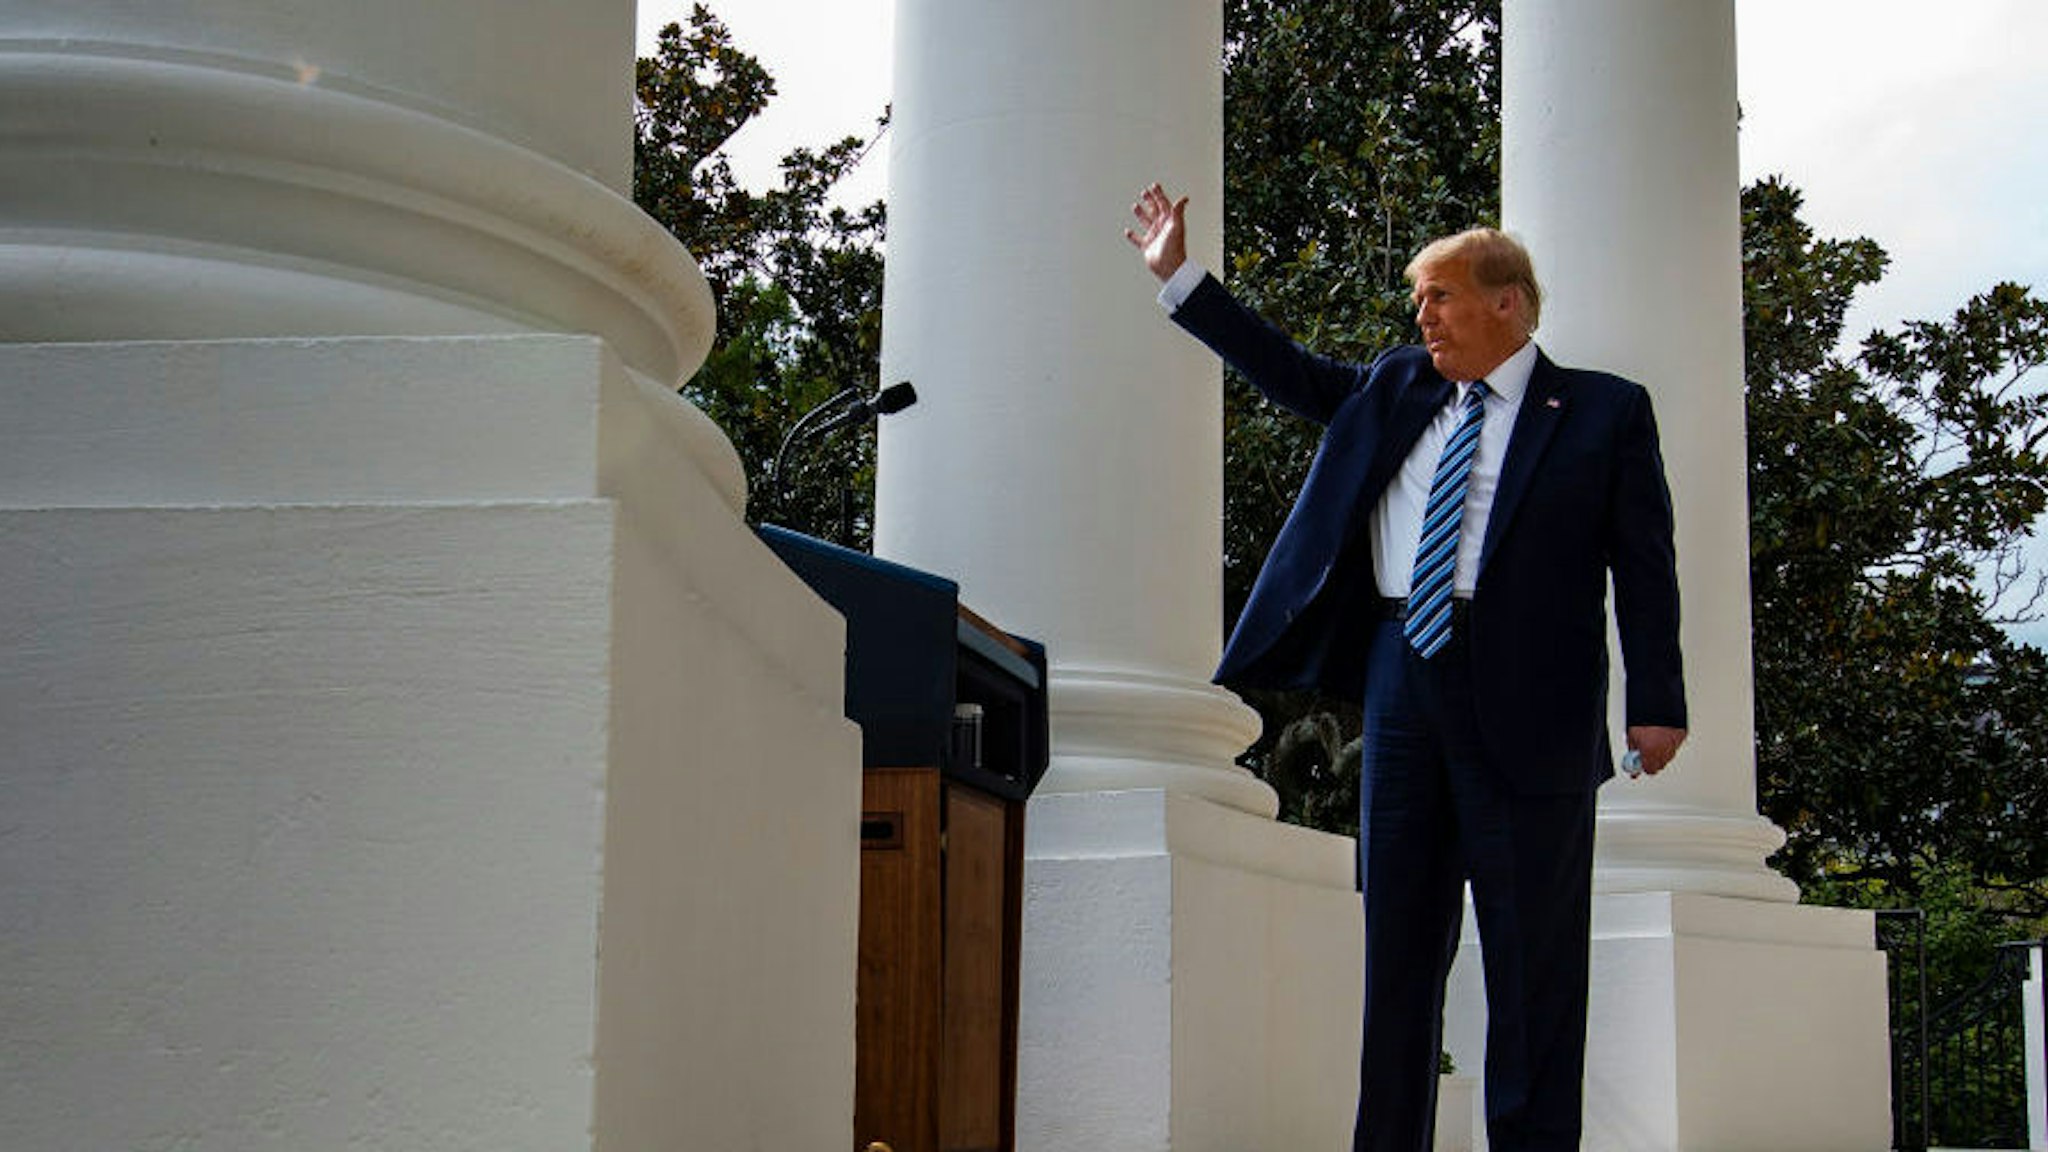 WASHINGTON, DC - OCTOBER 10: U.S. President Donald Trump waves after addressing a rally in support of law and order on the South Lawn of the White House on October 10, 2020 in Washington, DC. The President is making his first in-person appearance after being cleared by his doctors following his diagnosis and treatment of the coronavirus approximately 10 days ago.